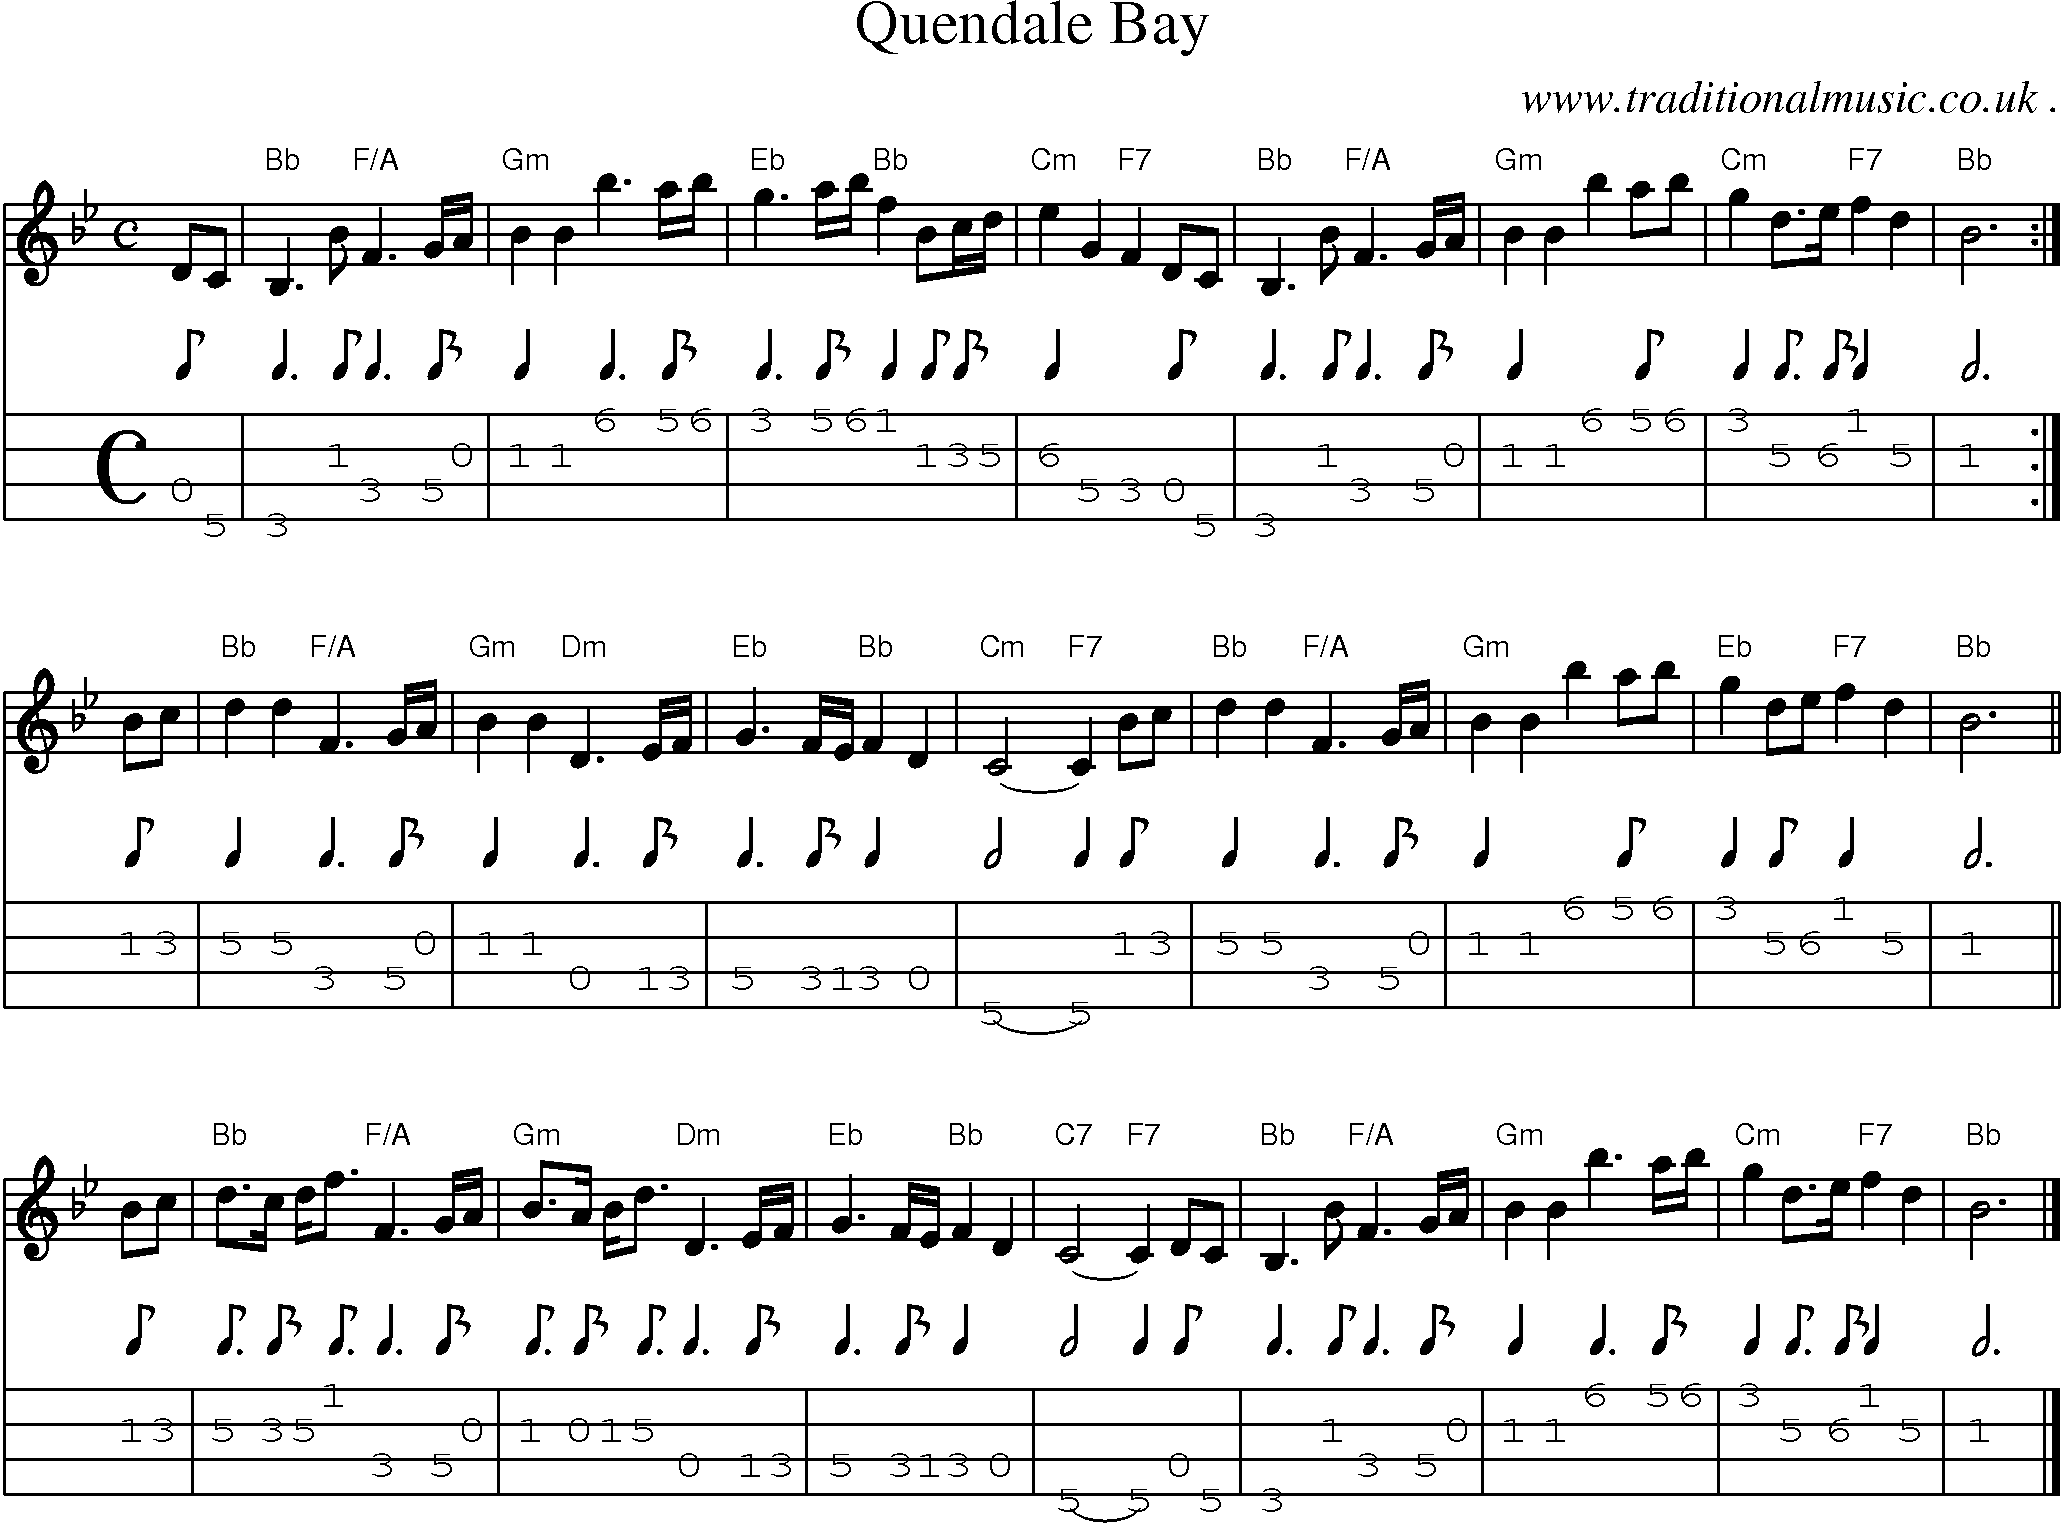 Sheet-music  score, Chords and Mandolin Tabs for Quendale Bay